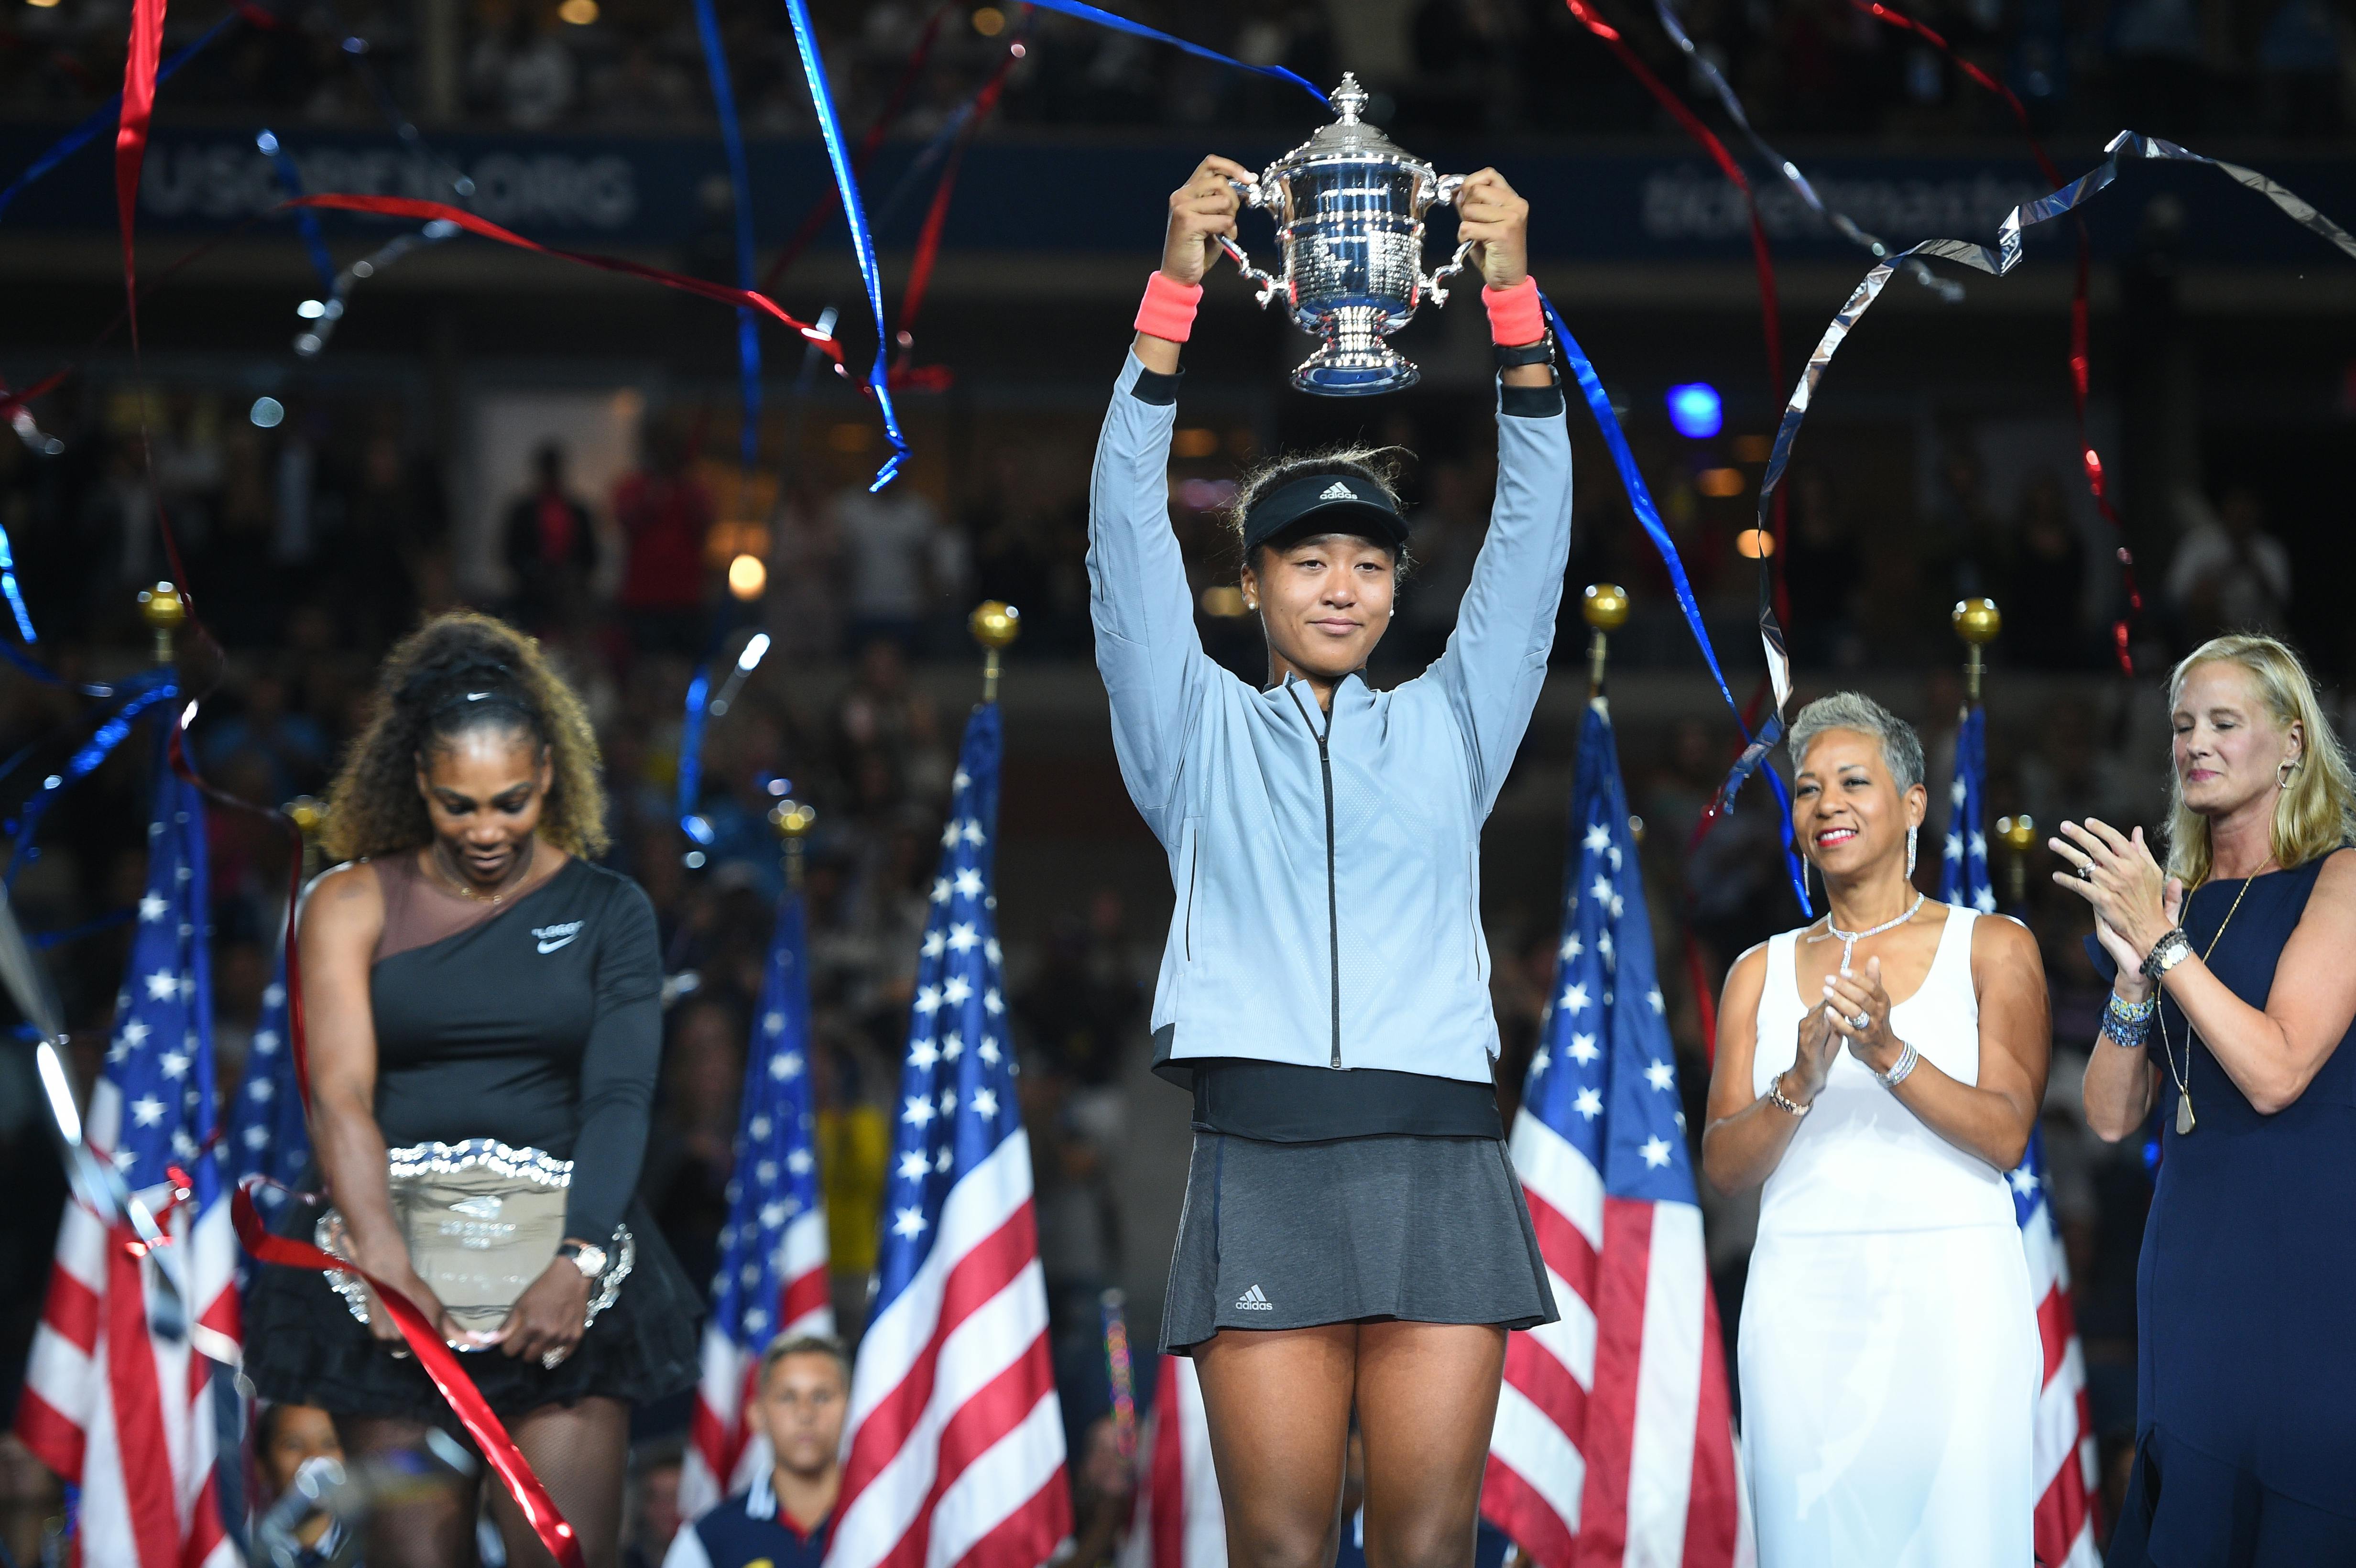 Naomi Osaka holdinh her trophy with Serena Williams in the background US Open 2018